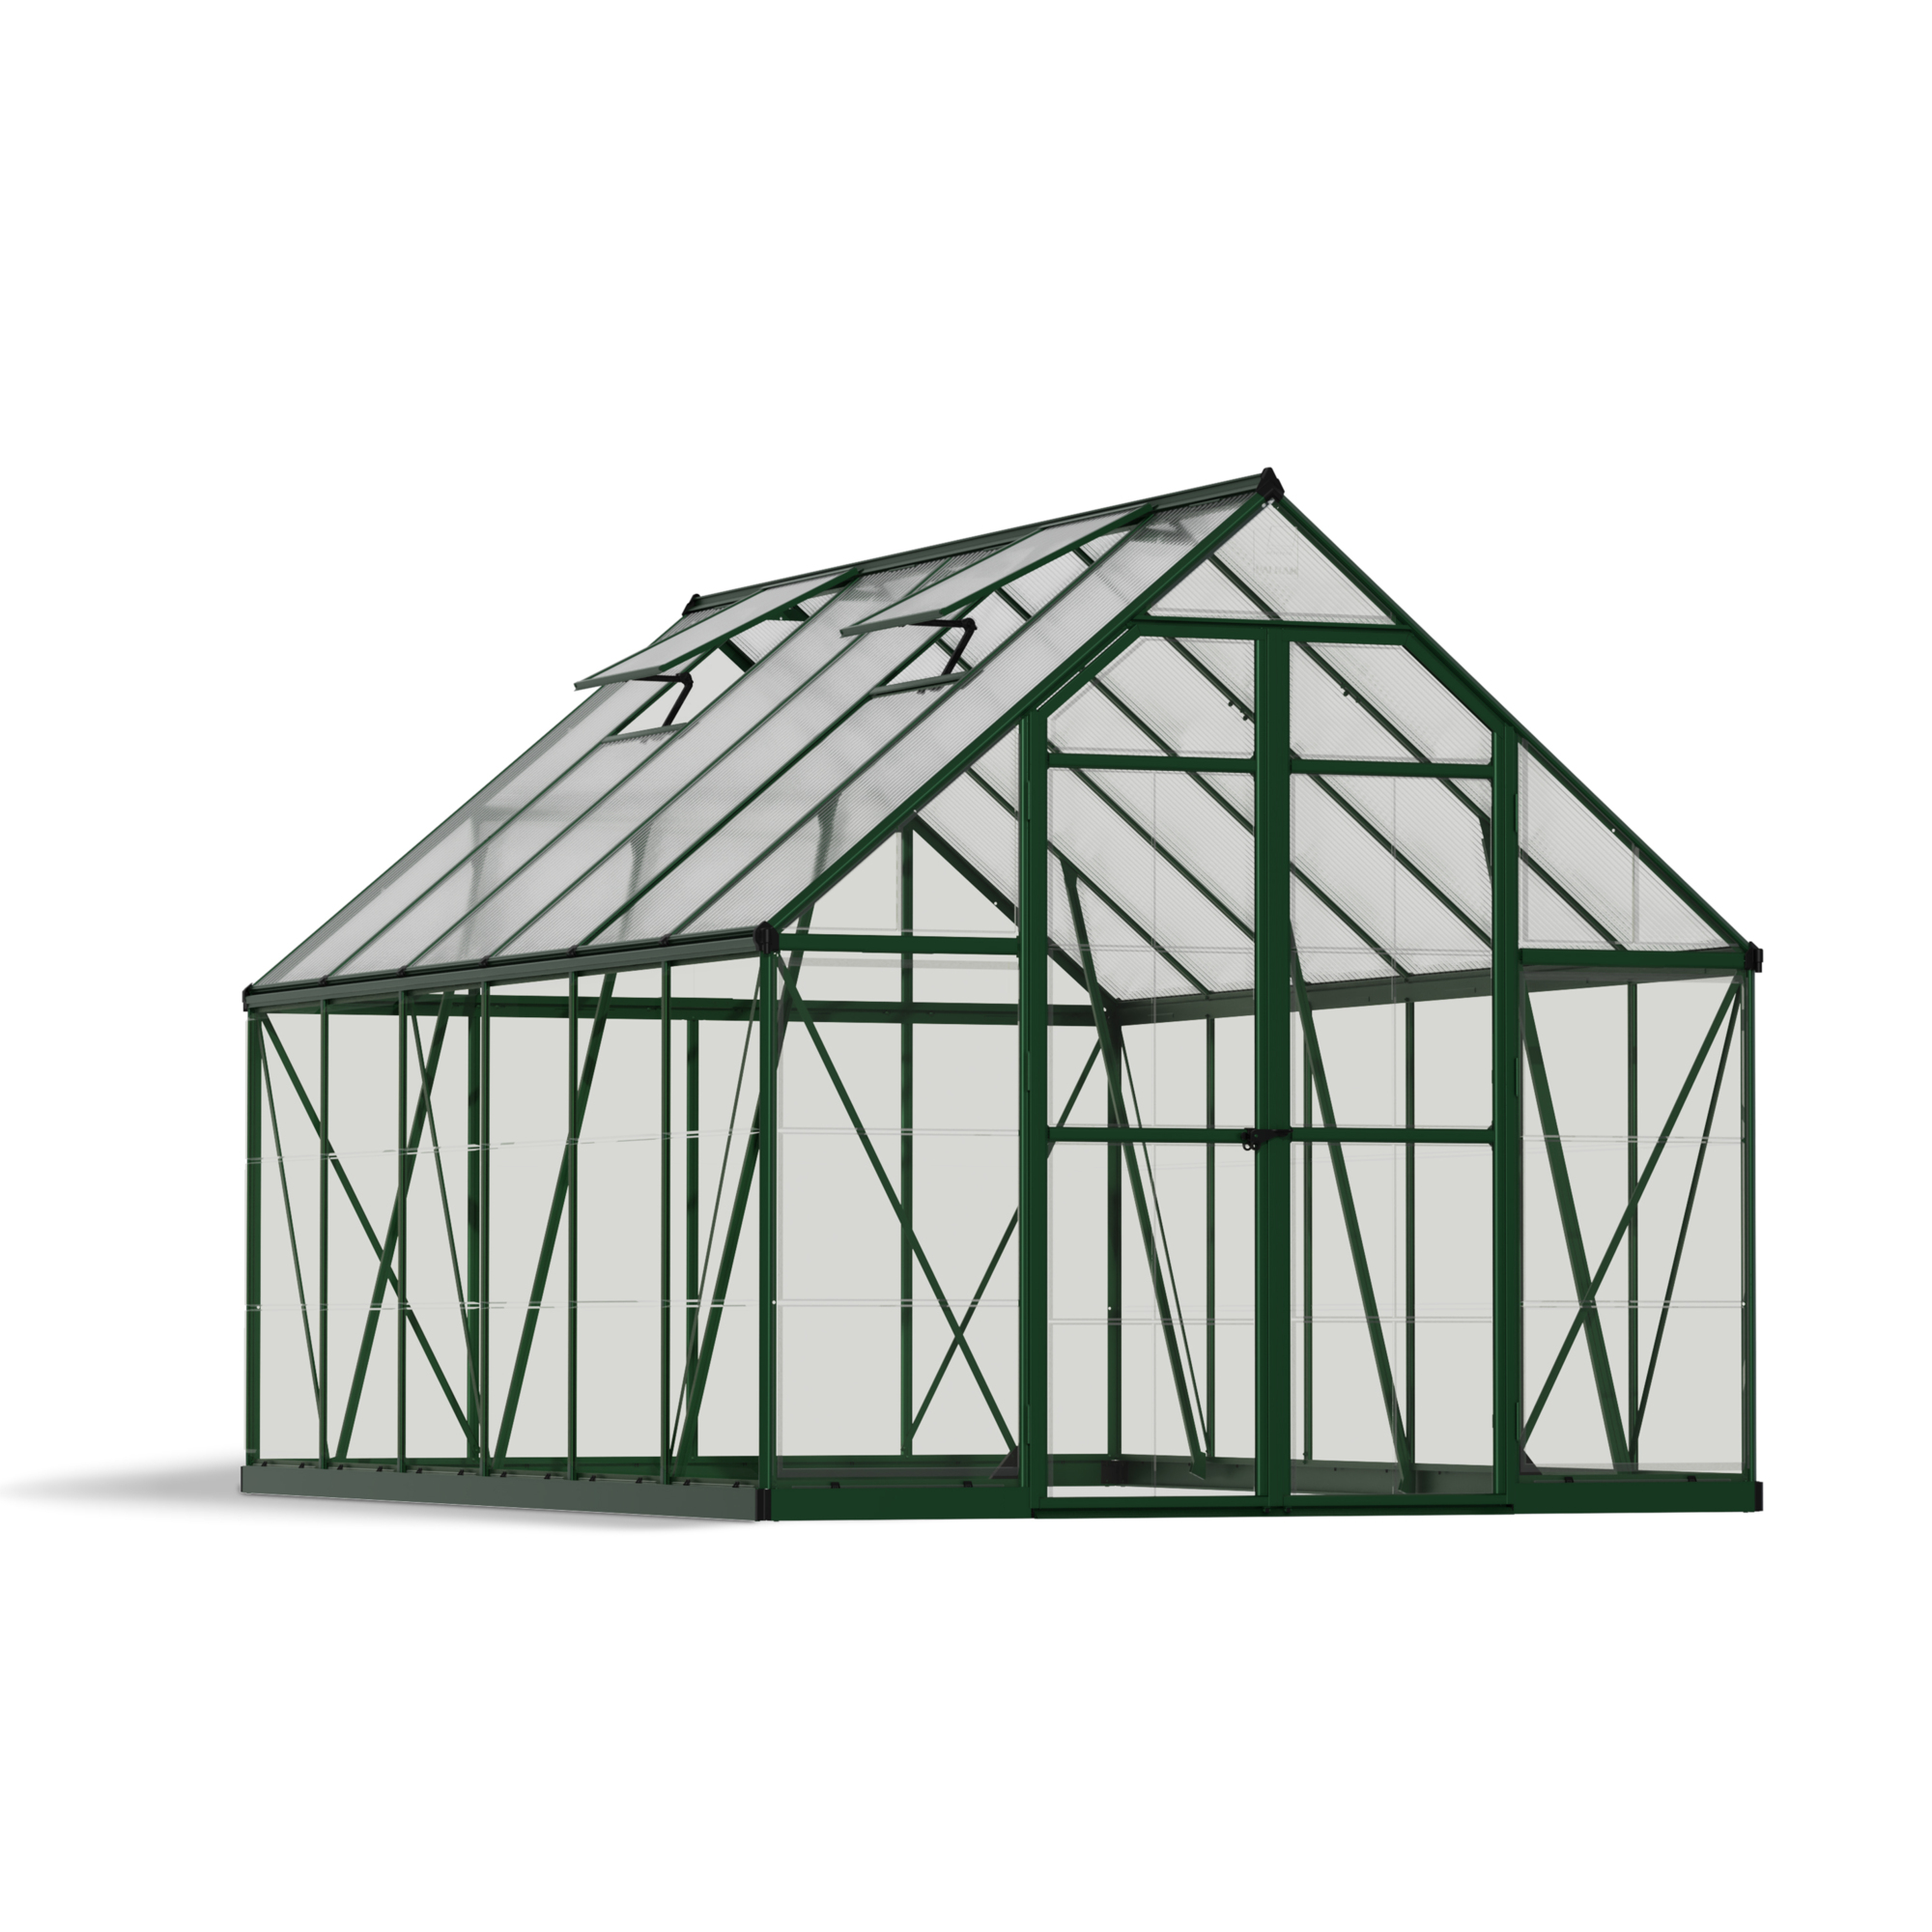 Poly-Tex Inc., Balance 8ft. x 12ft. Greenhouse - Green, Length 144 in, Width 96 in, Center Height 91 in, Model 703489